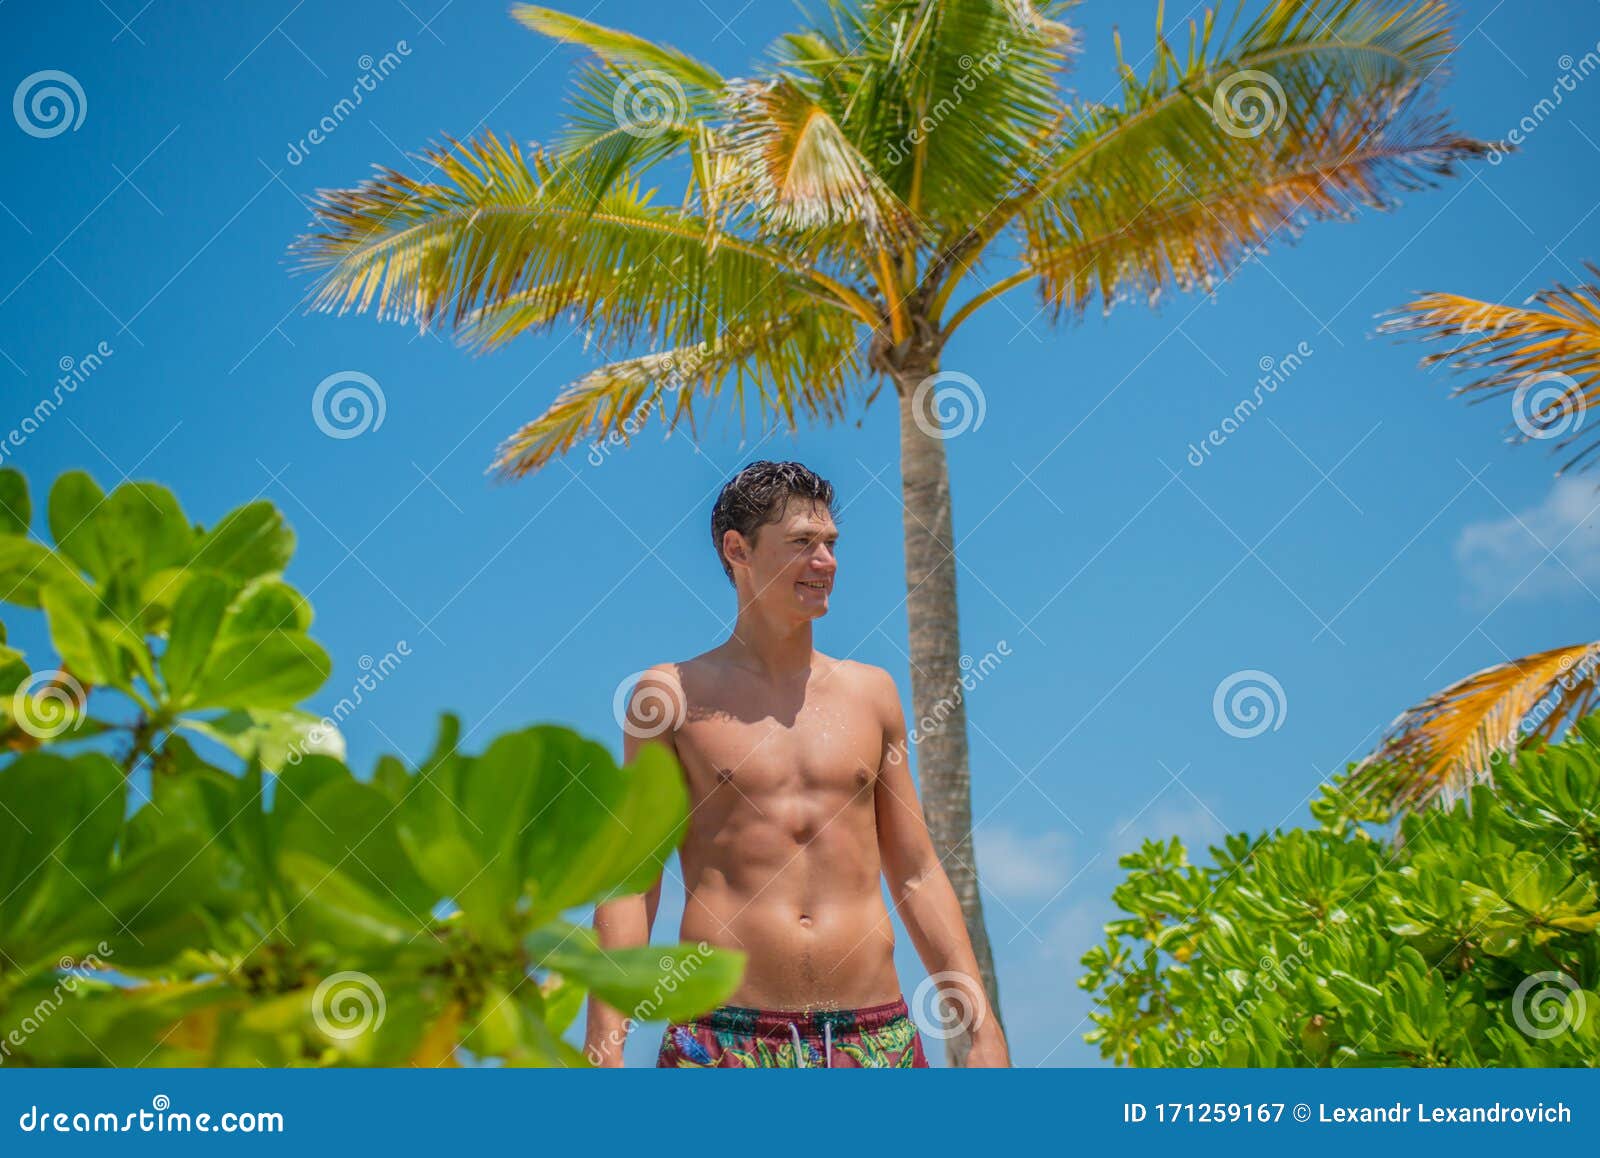 Handsome Model Looking Man on the Beach with Palm Trees at the Tropical ...